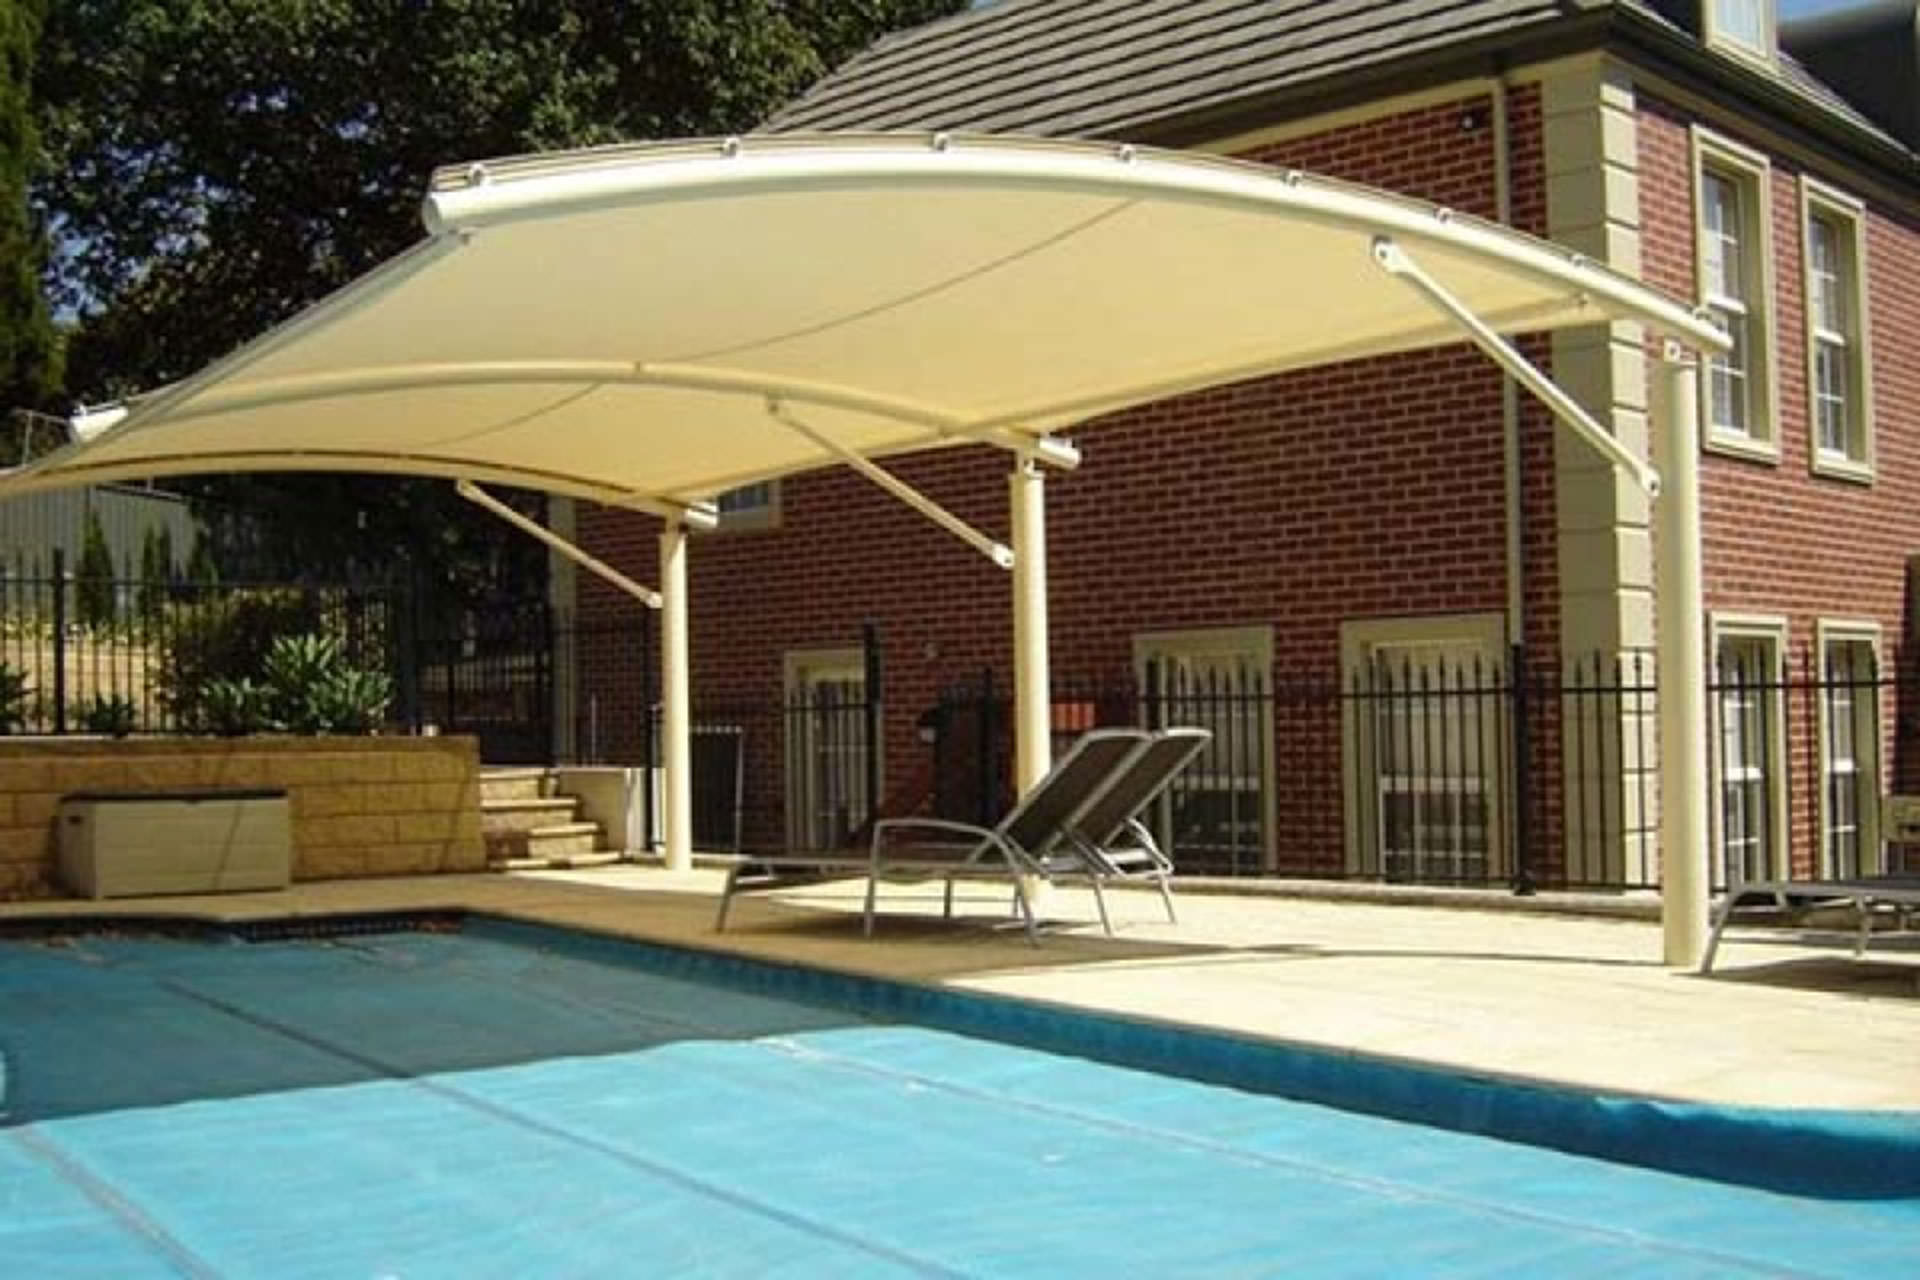 Pool Shade Ideas Cantilevered